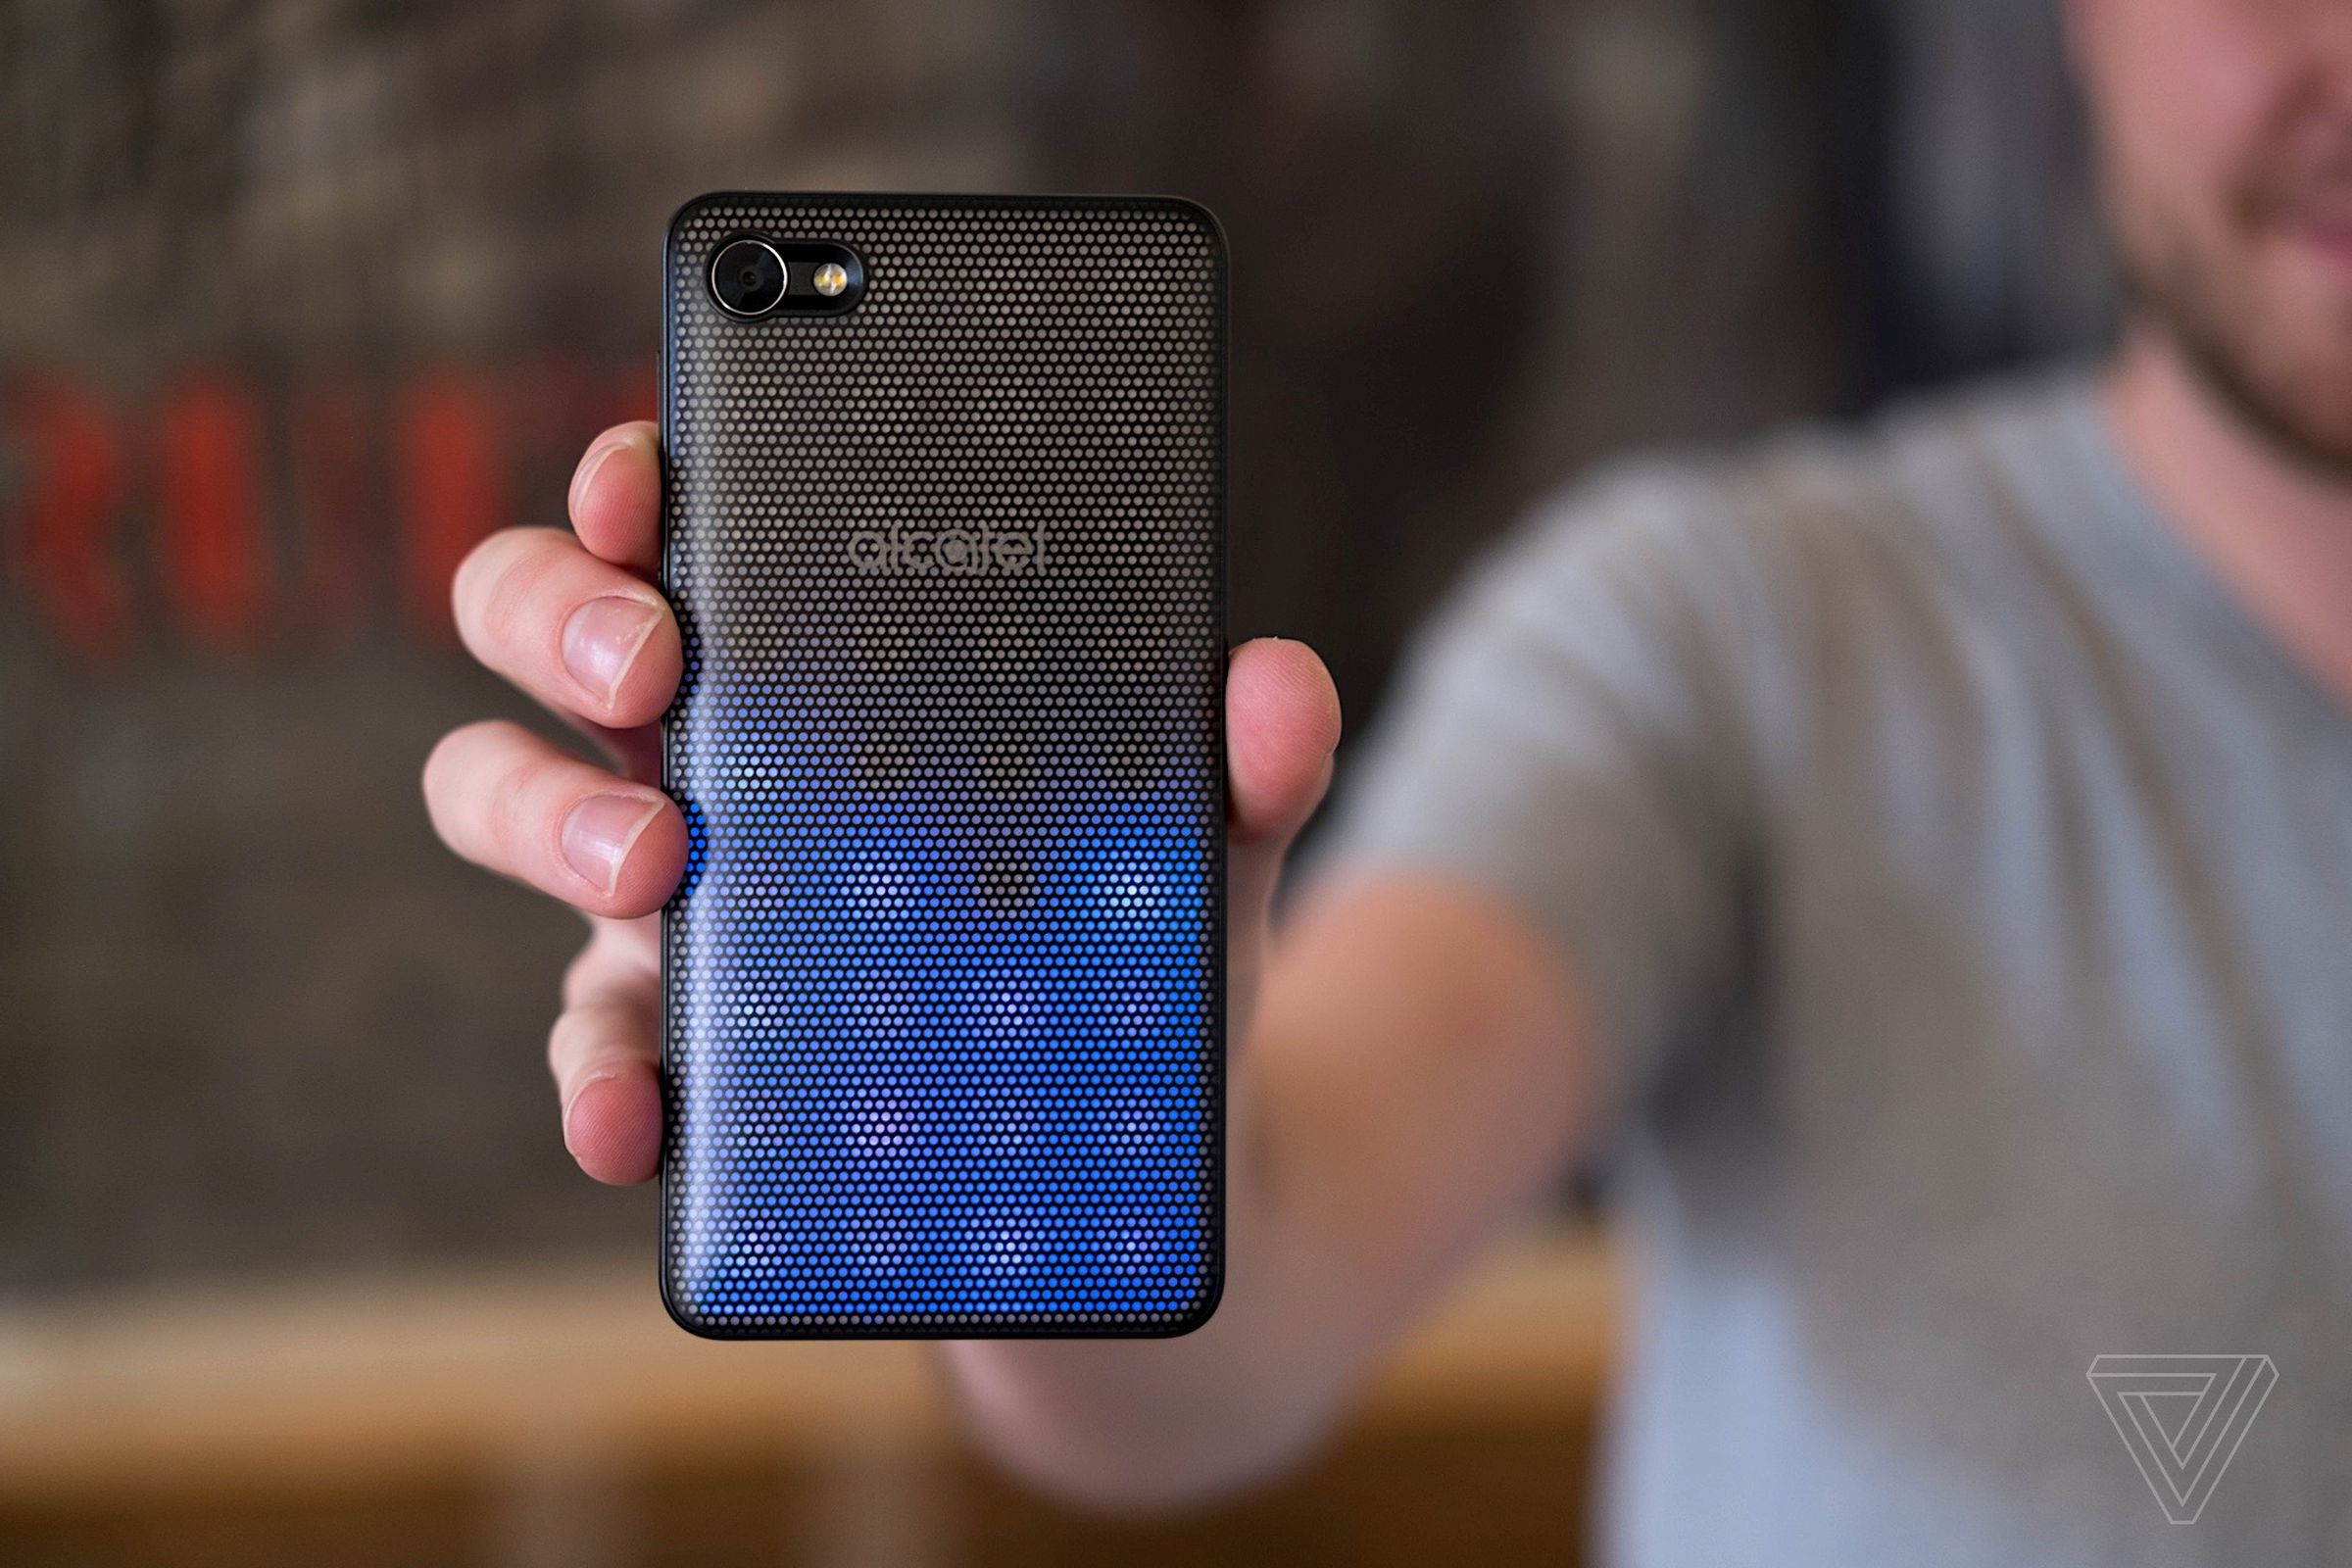 The Alcatel A5 with its light-up LED back.